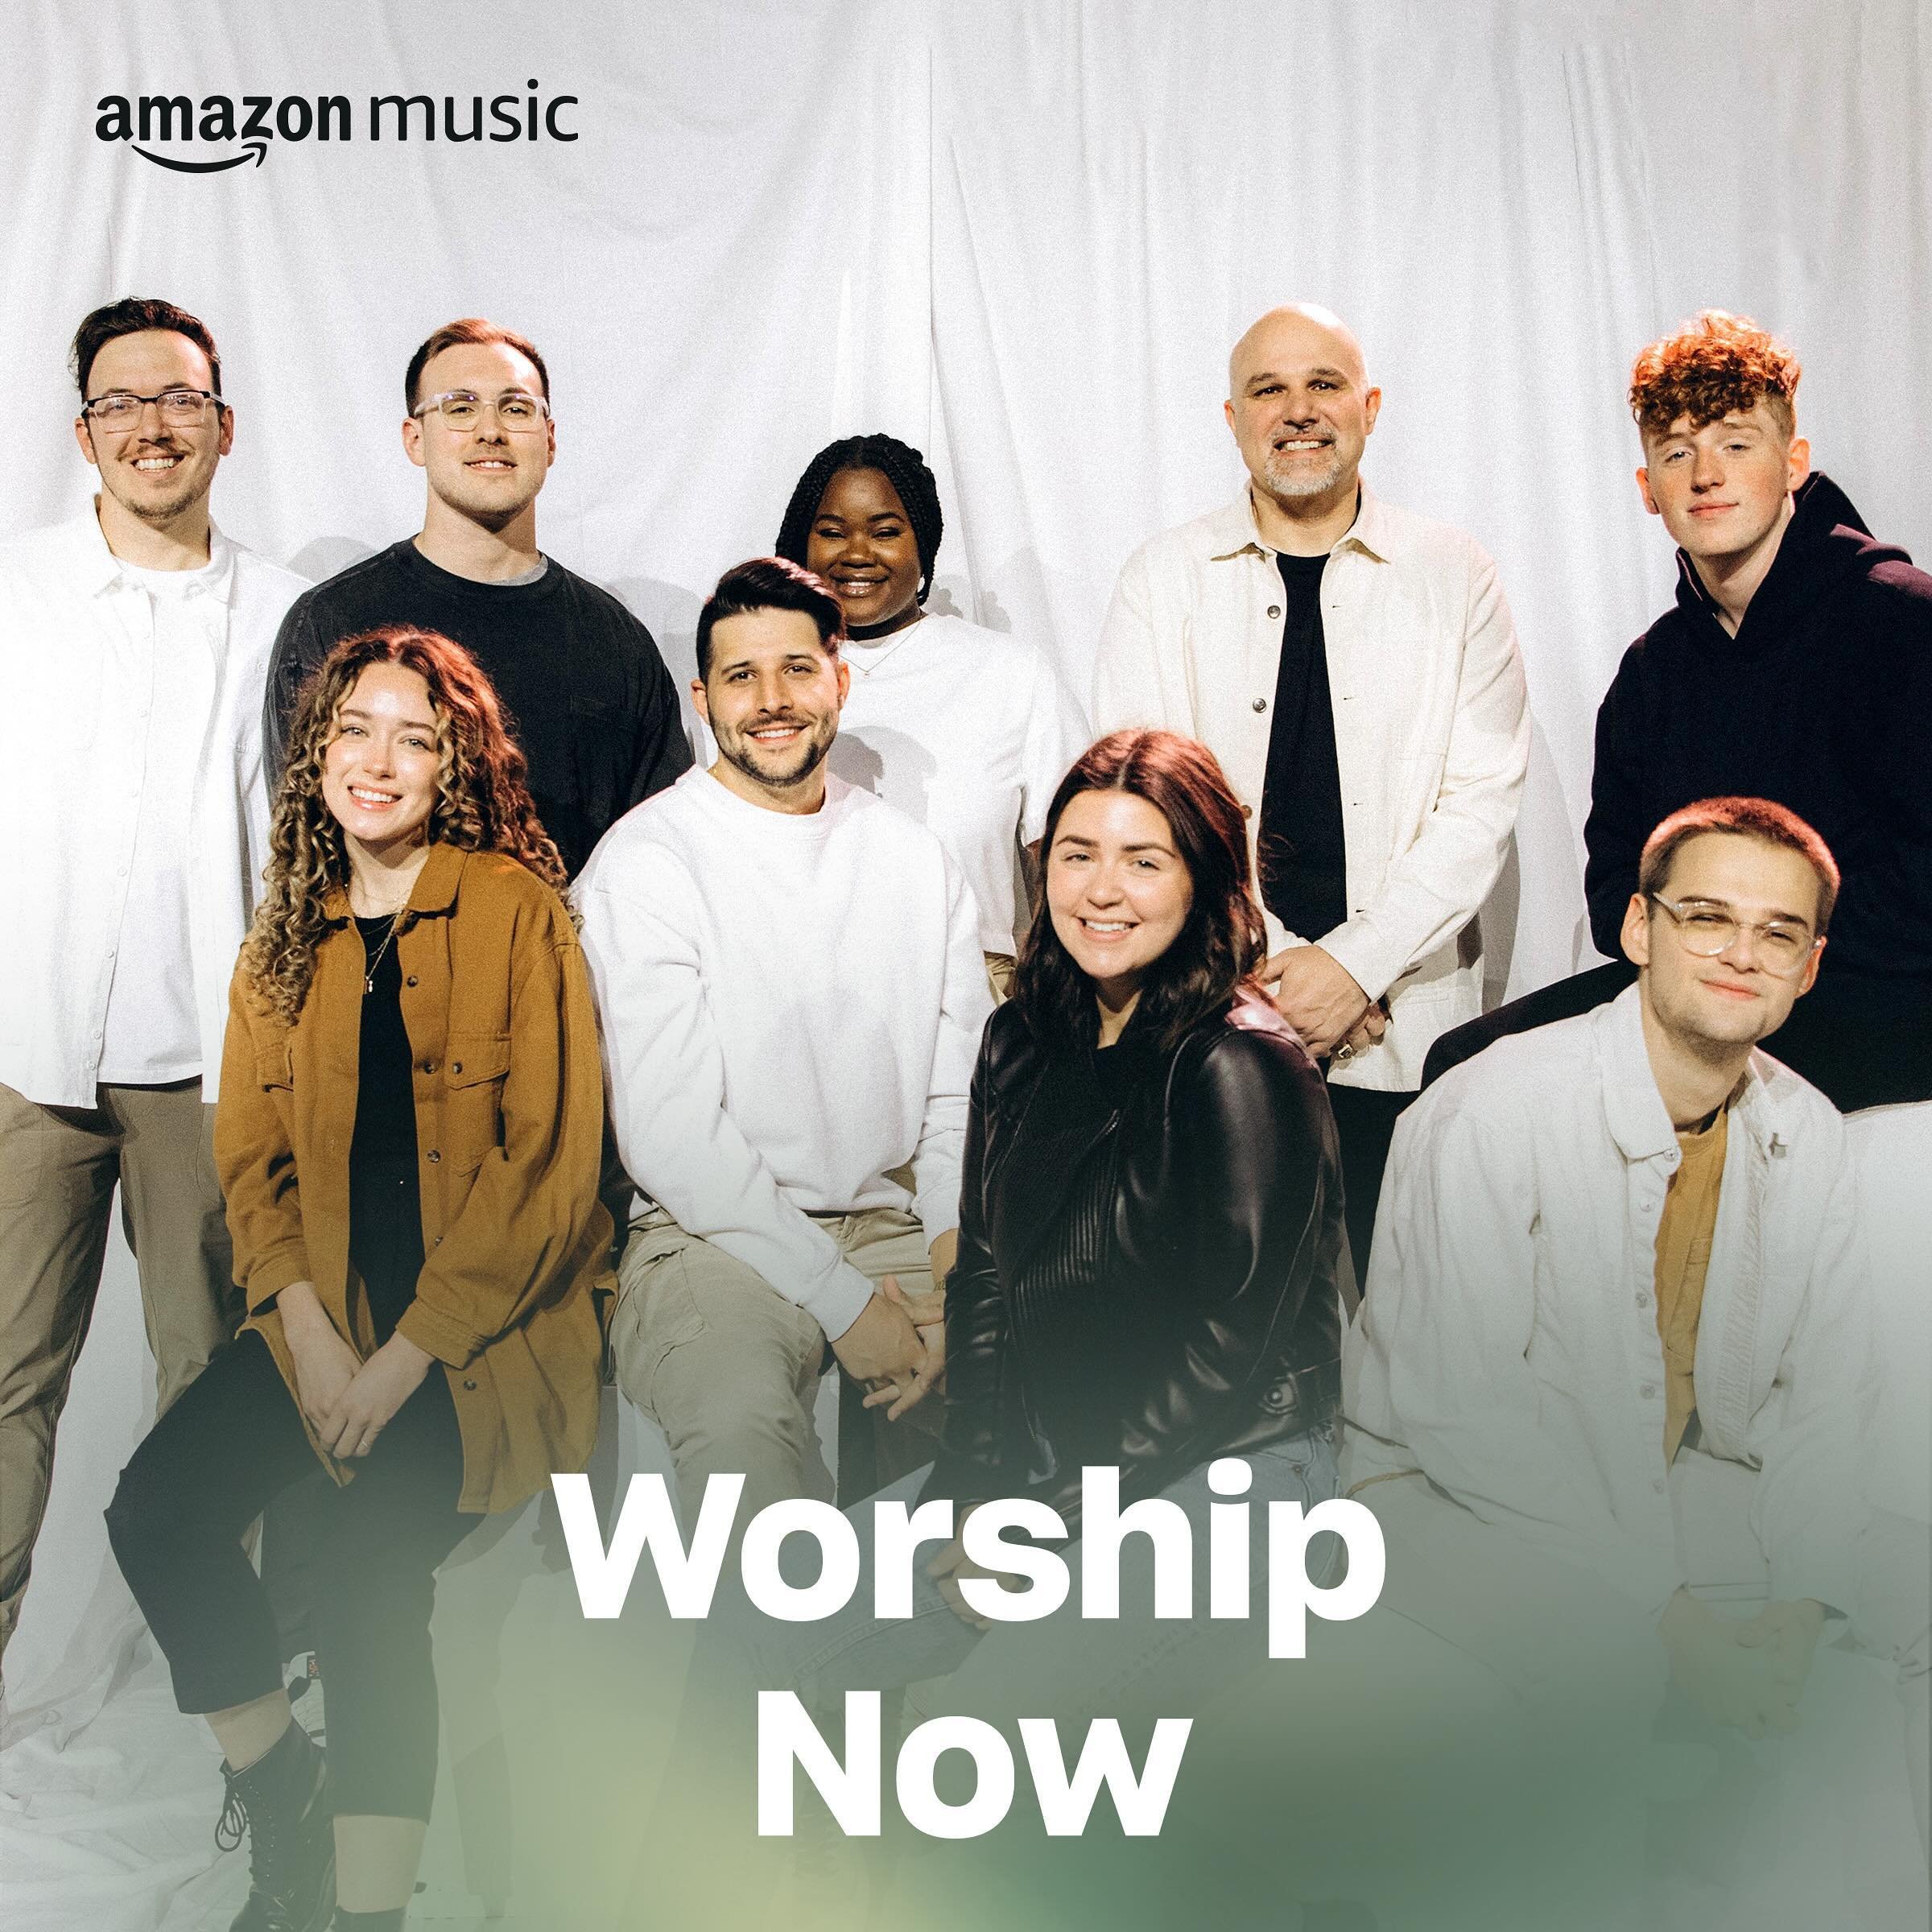 Thanks to our friends at @amazonmusic for putting @7hillsworship on the cover of Worship Now on the day they release the first single, Again and Again, from their new album 🙌🏼

We are so grateful that teams like Amazon&rsquo;s continue to support a